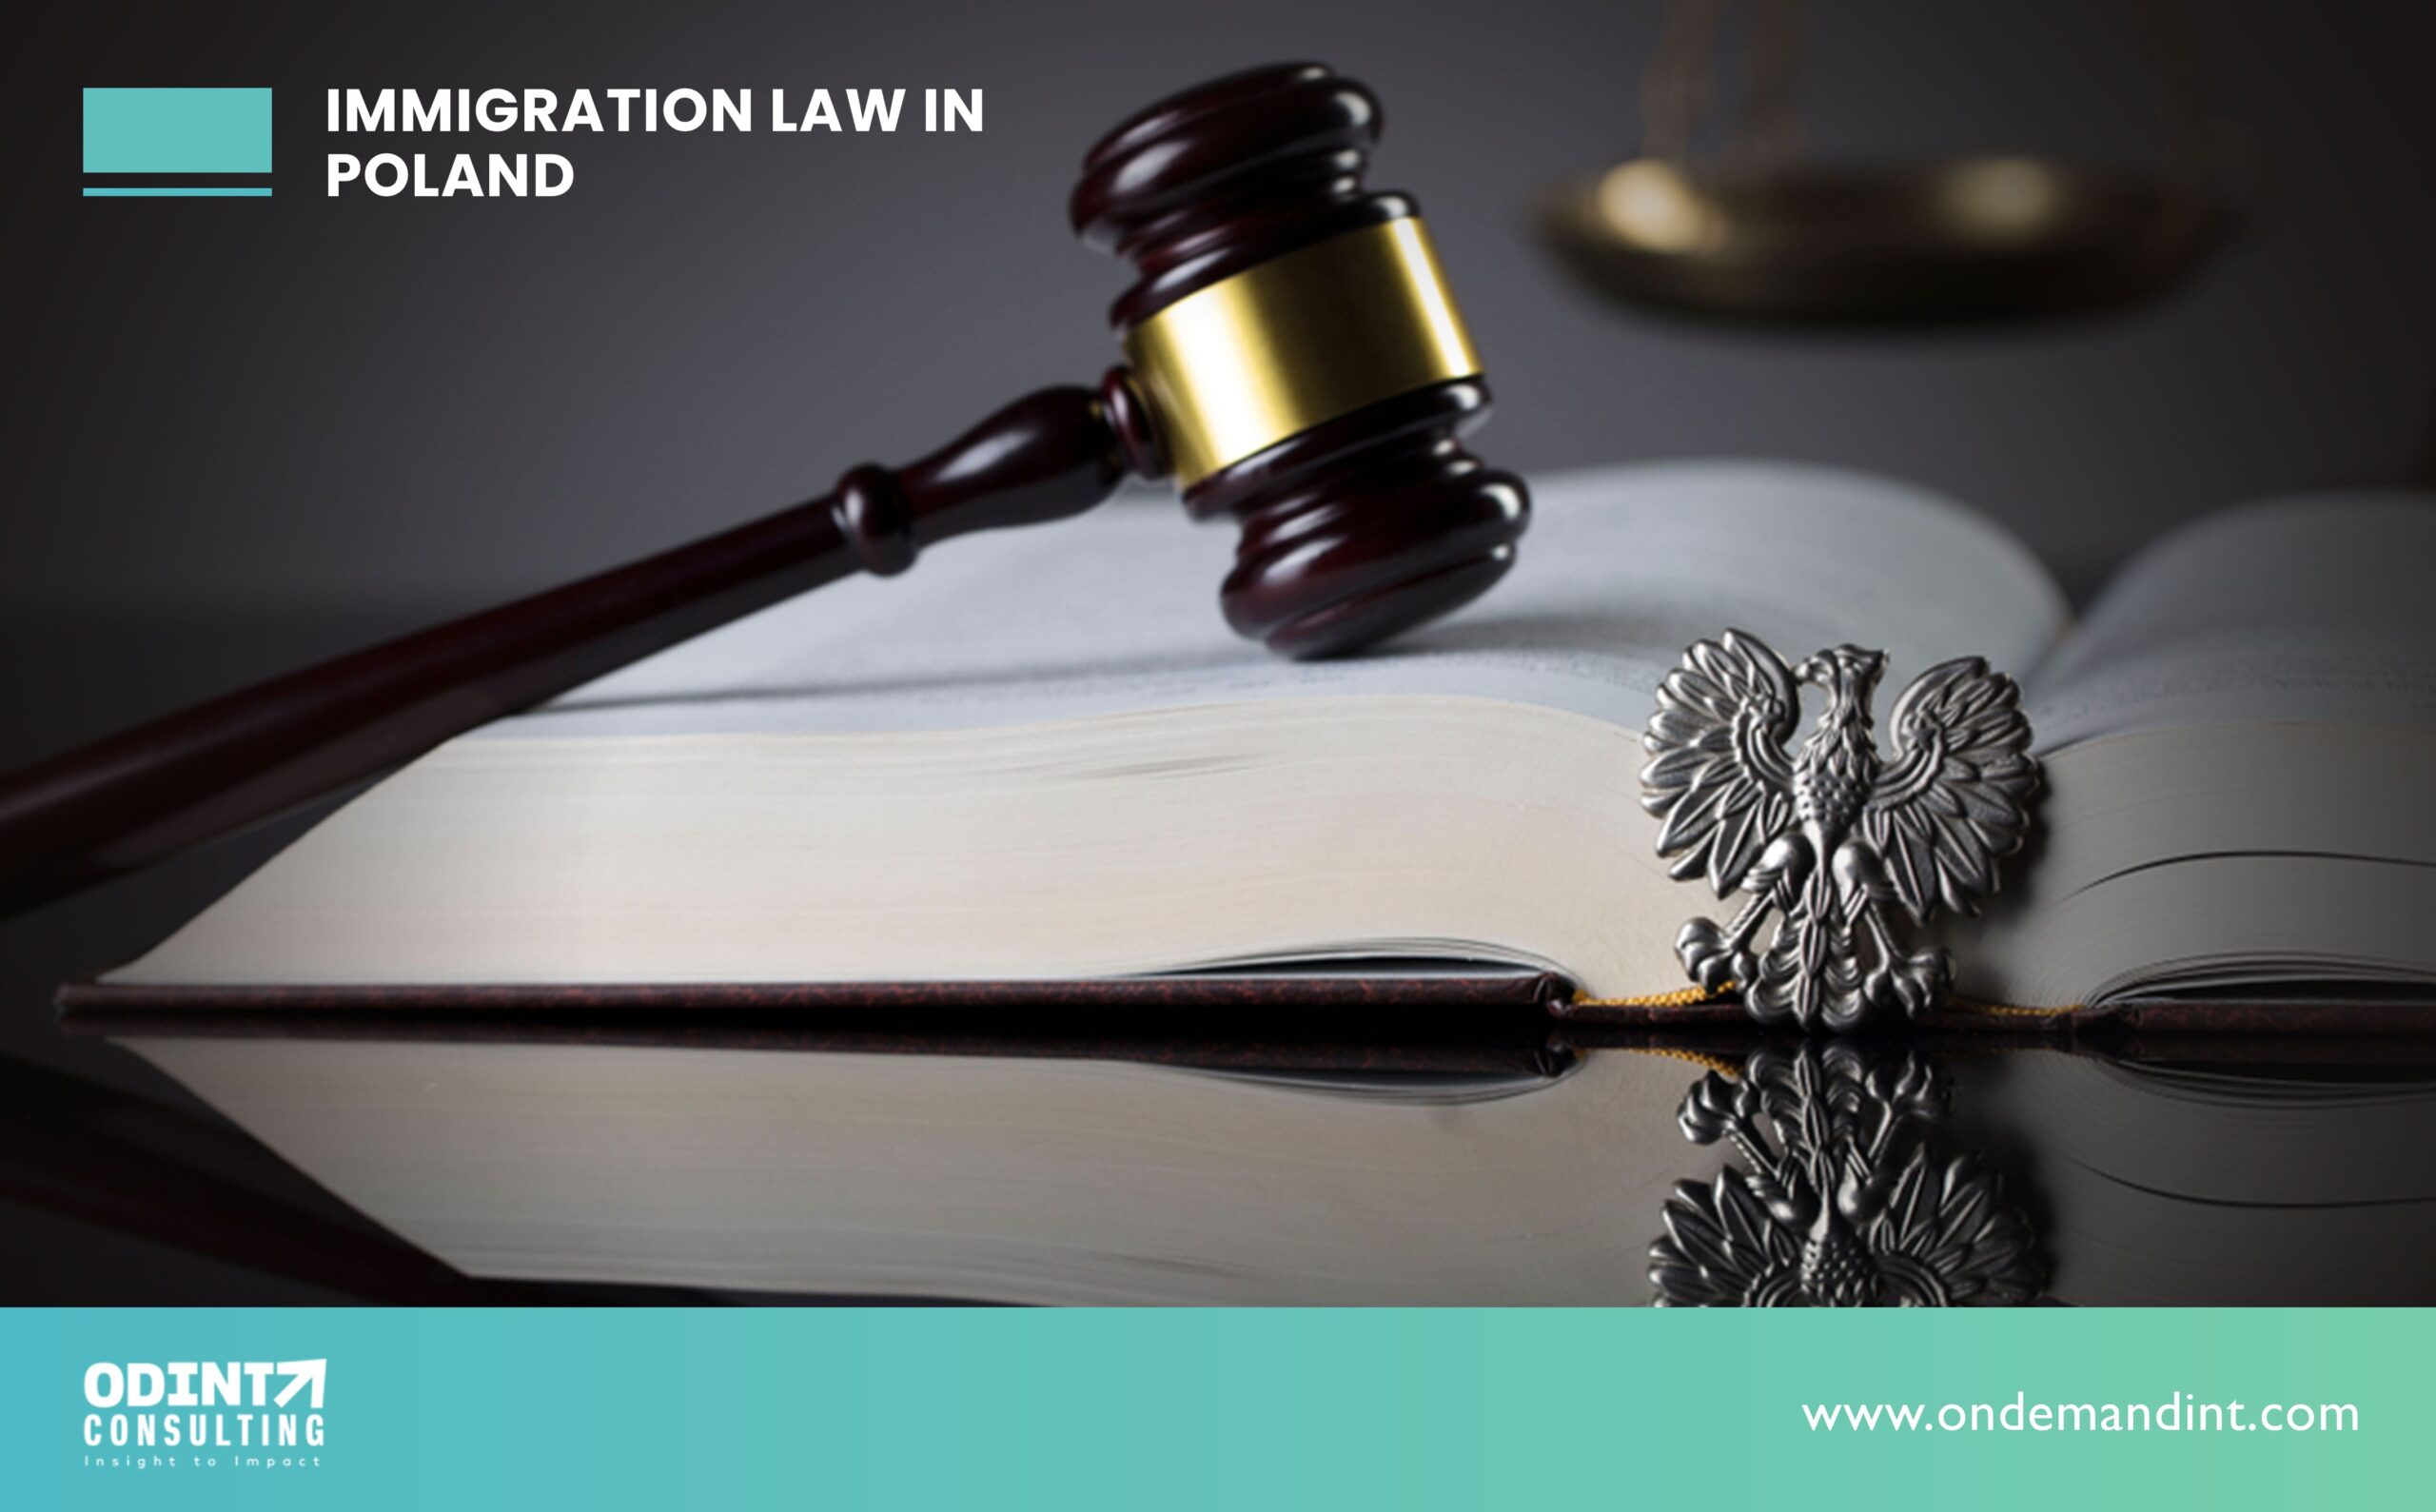 Immigration Laws In Poland: Meaning, Visa Categories & Measures To Avoid Unlawful Employment